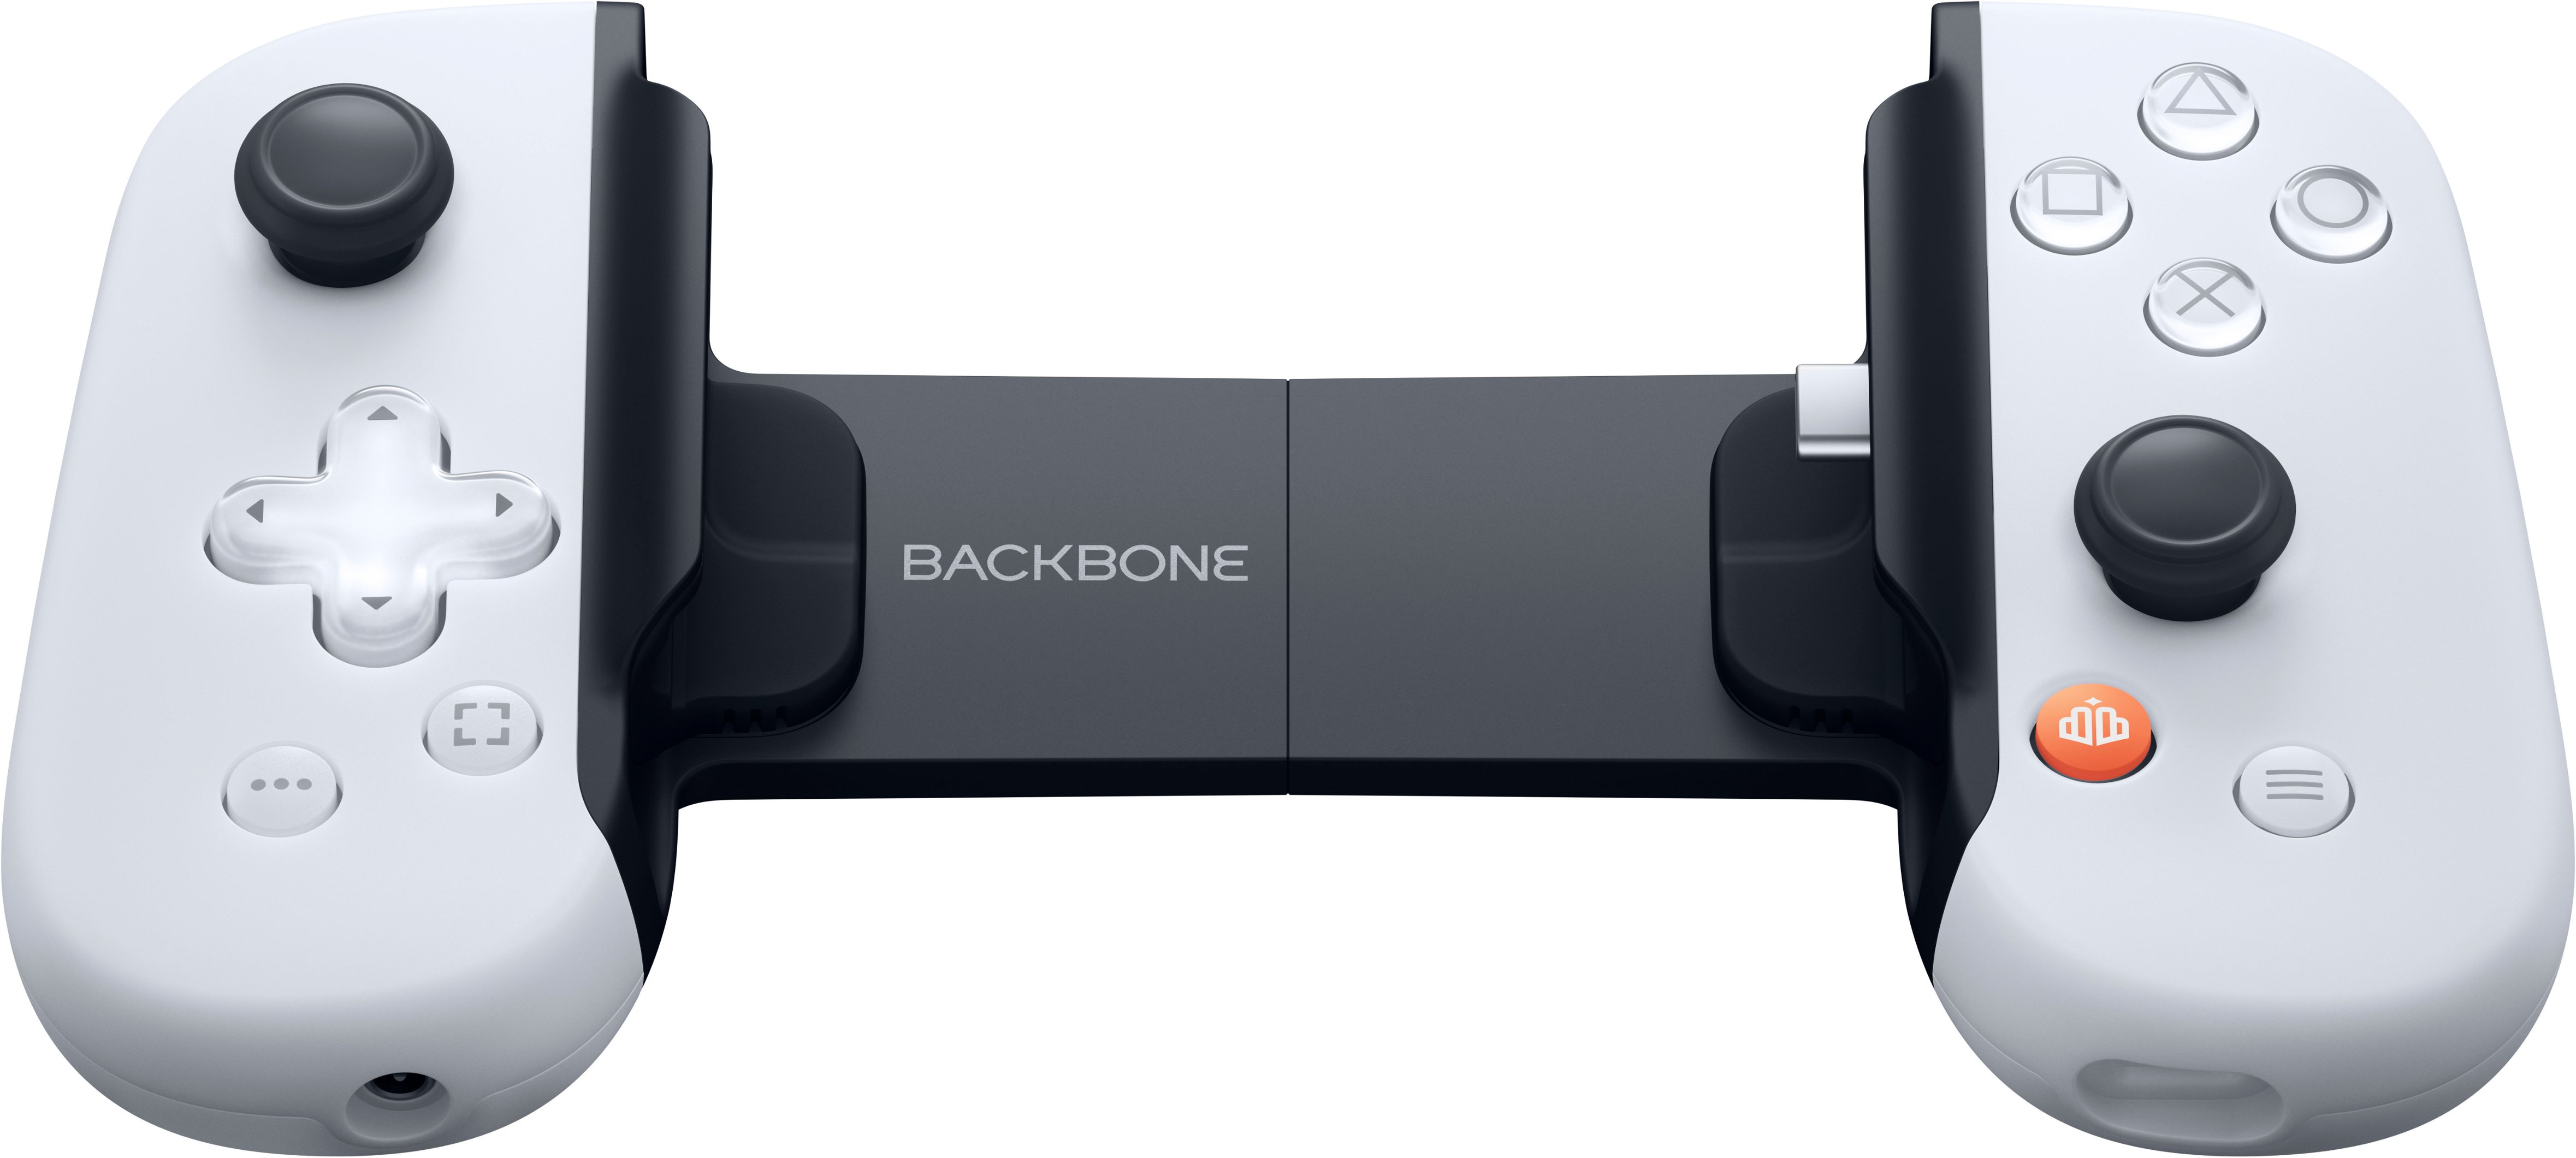 Backbone One gaming controller for the iPhone is $70 today - The Verge